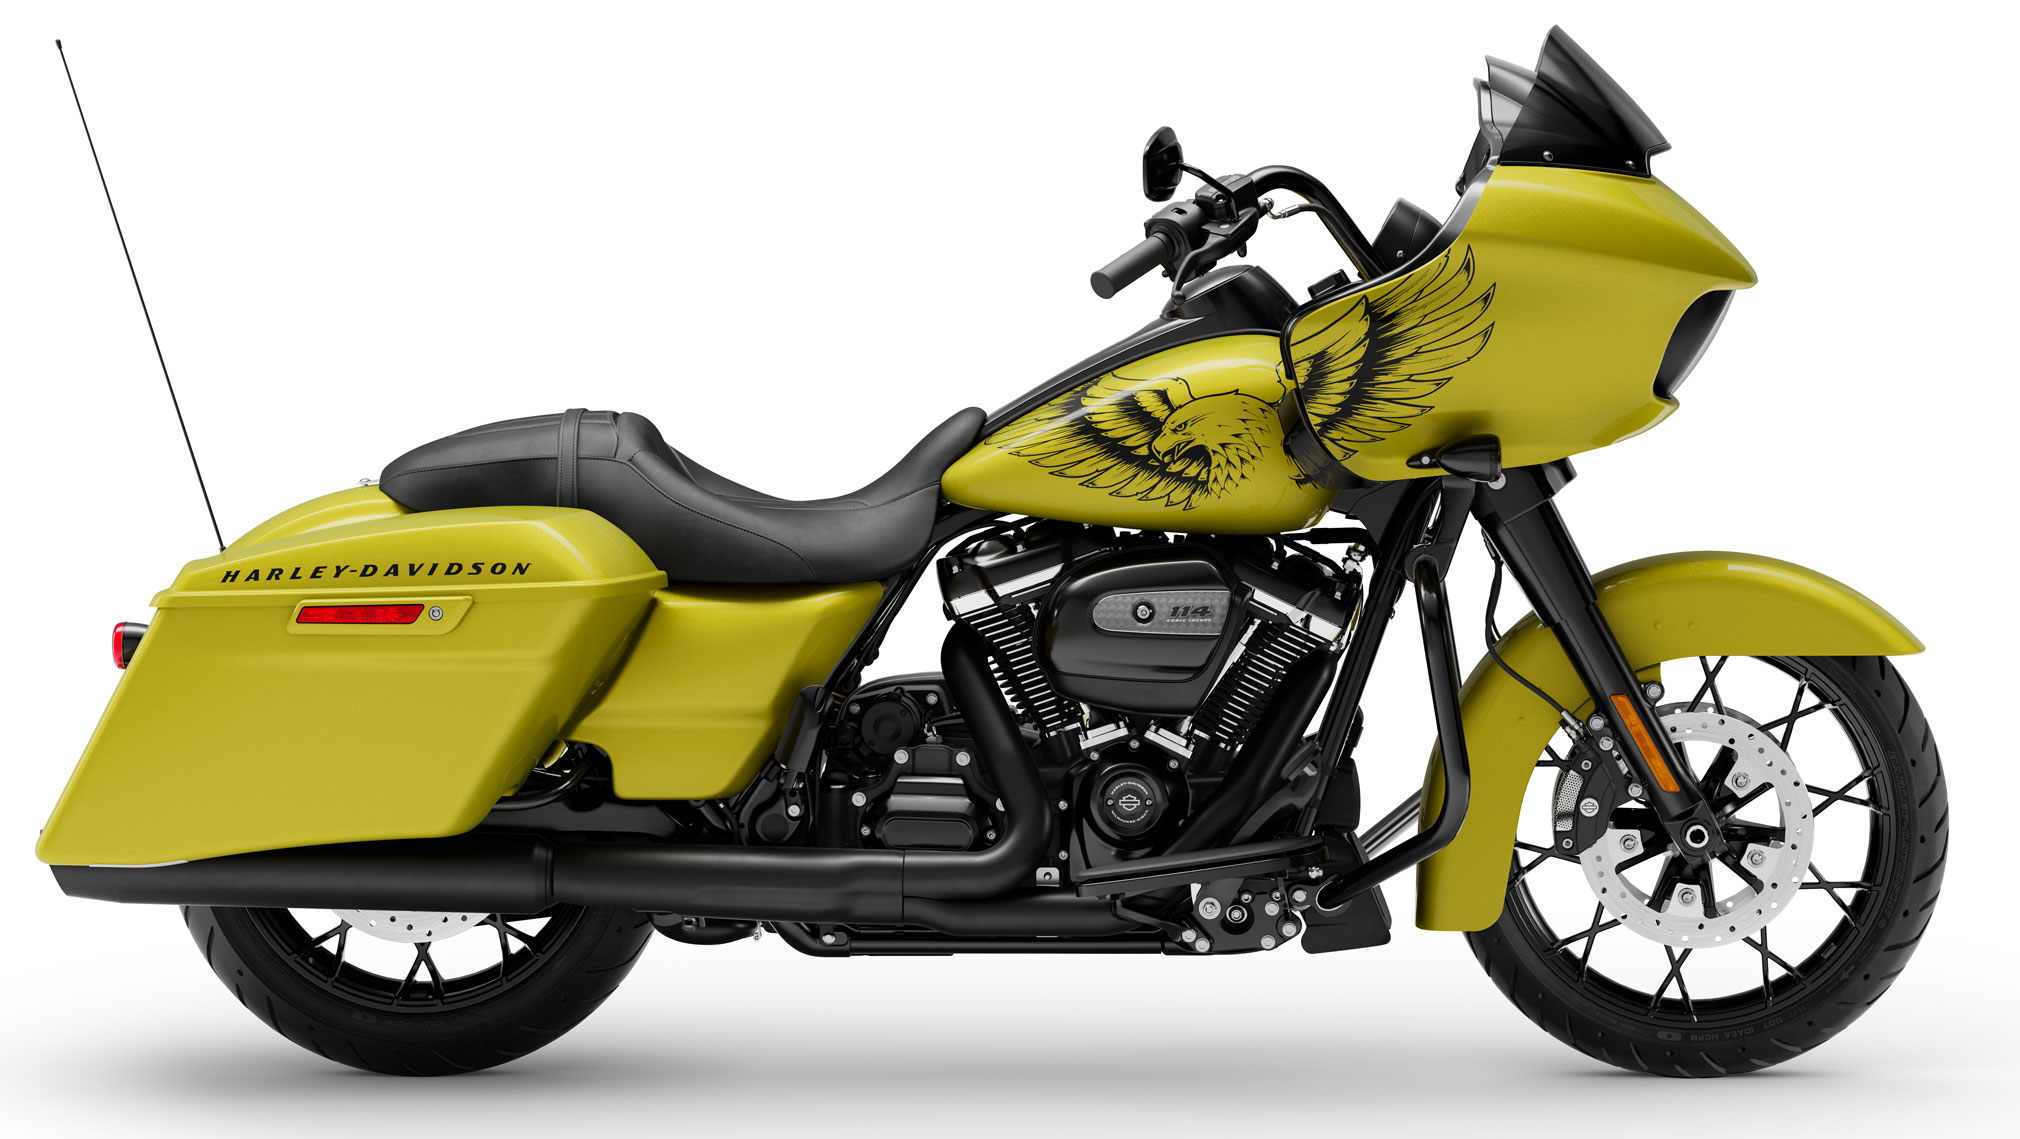 The new HarleyDavidson Eagle Eye Special Edition Paint Stunner